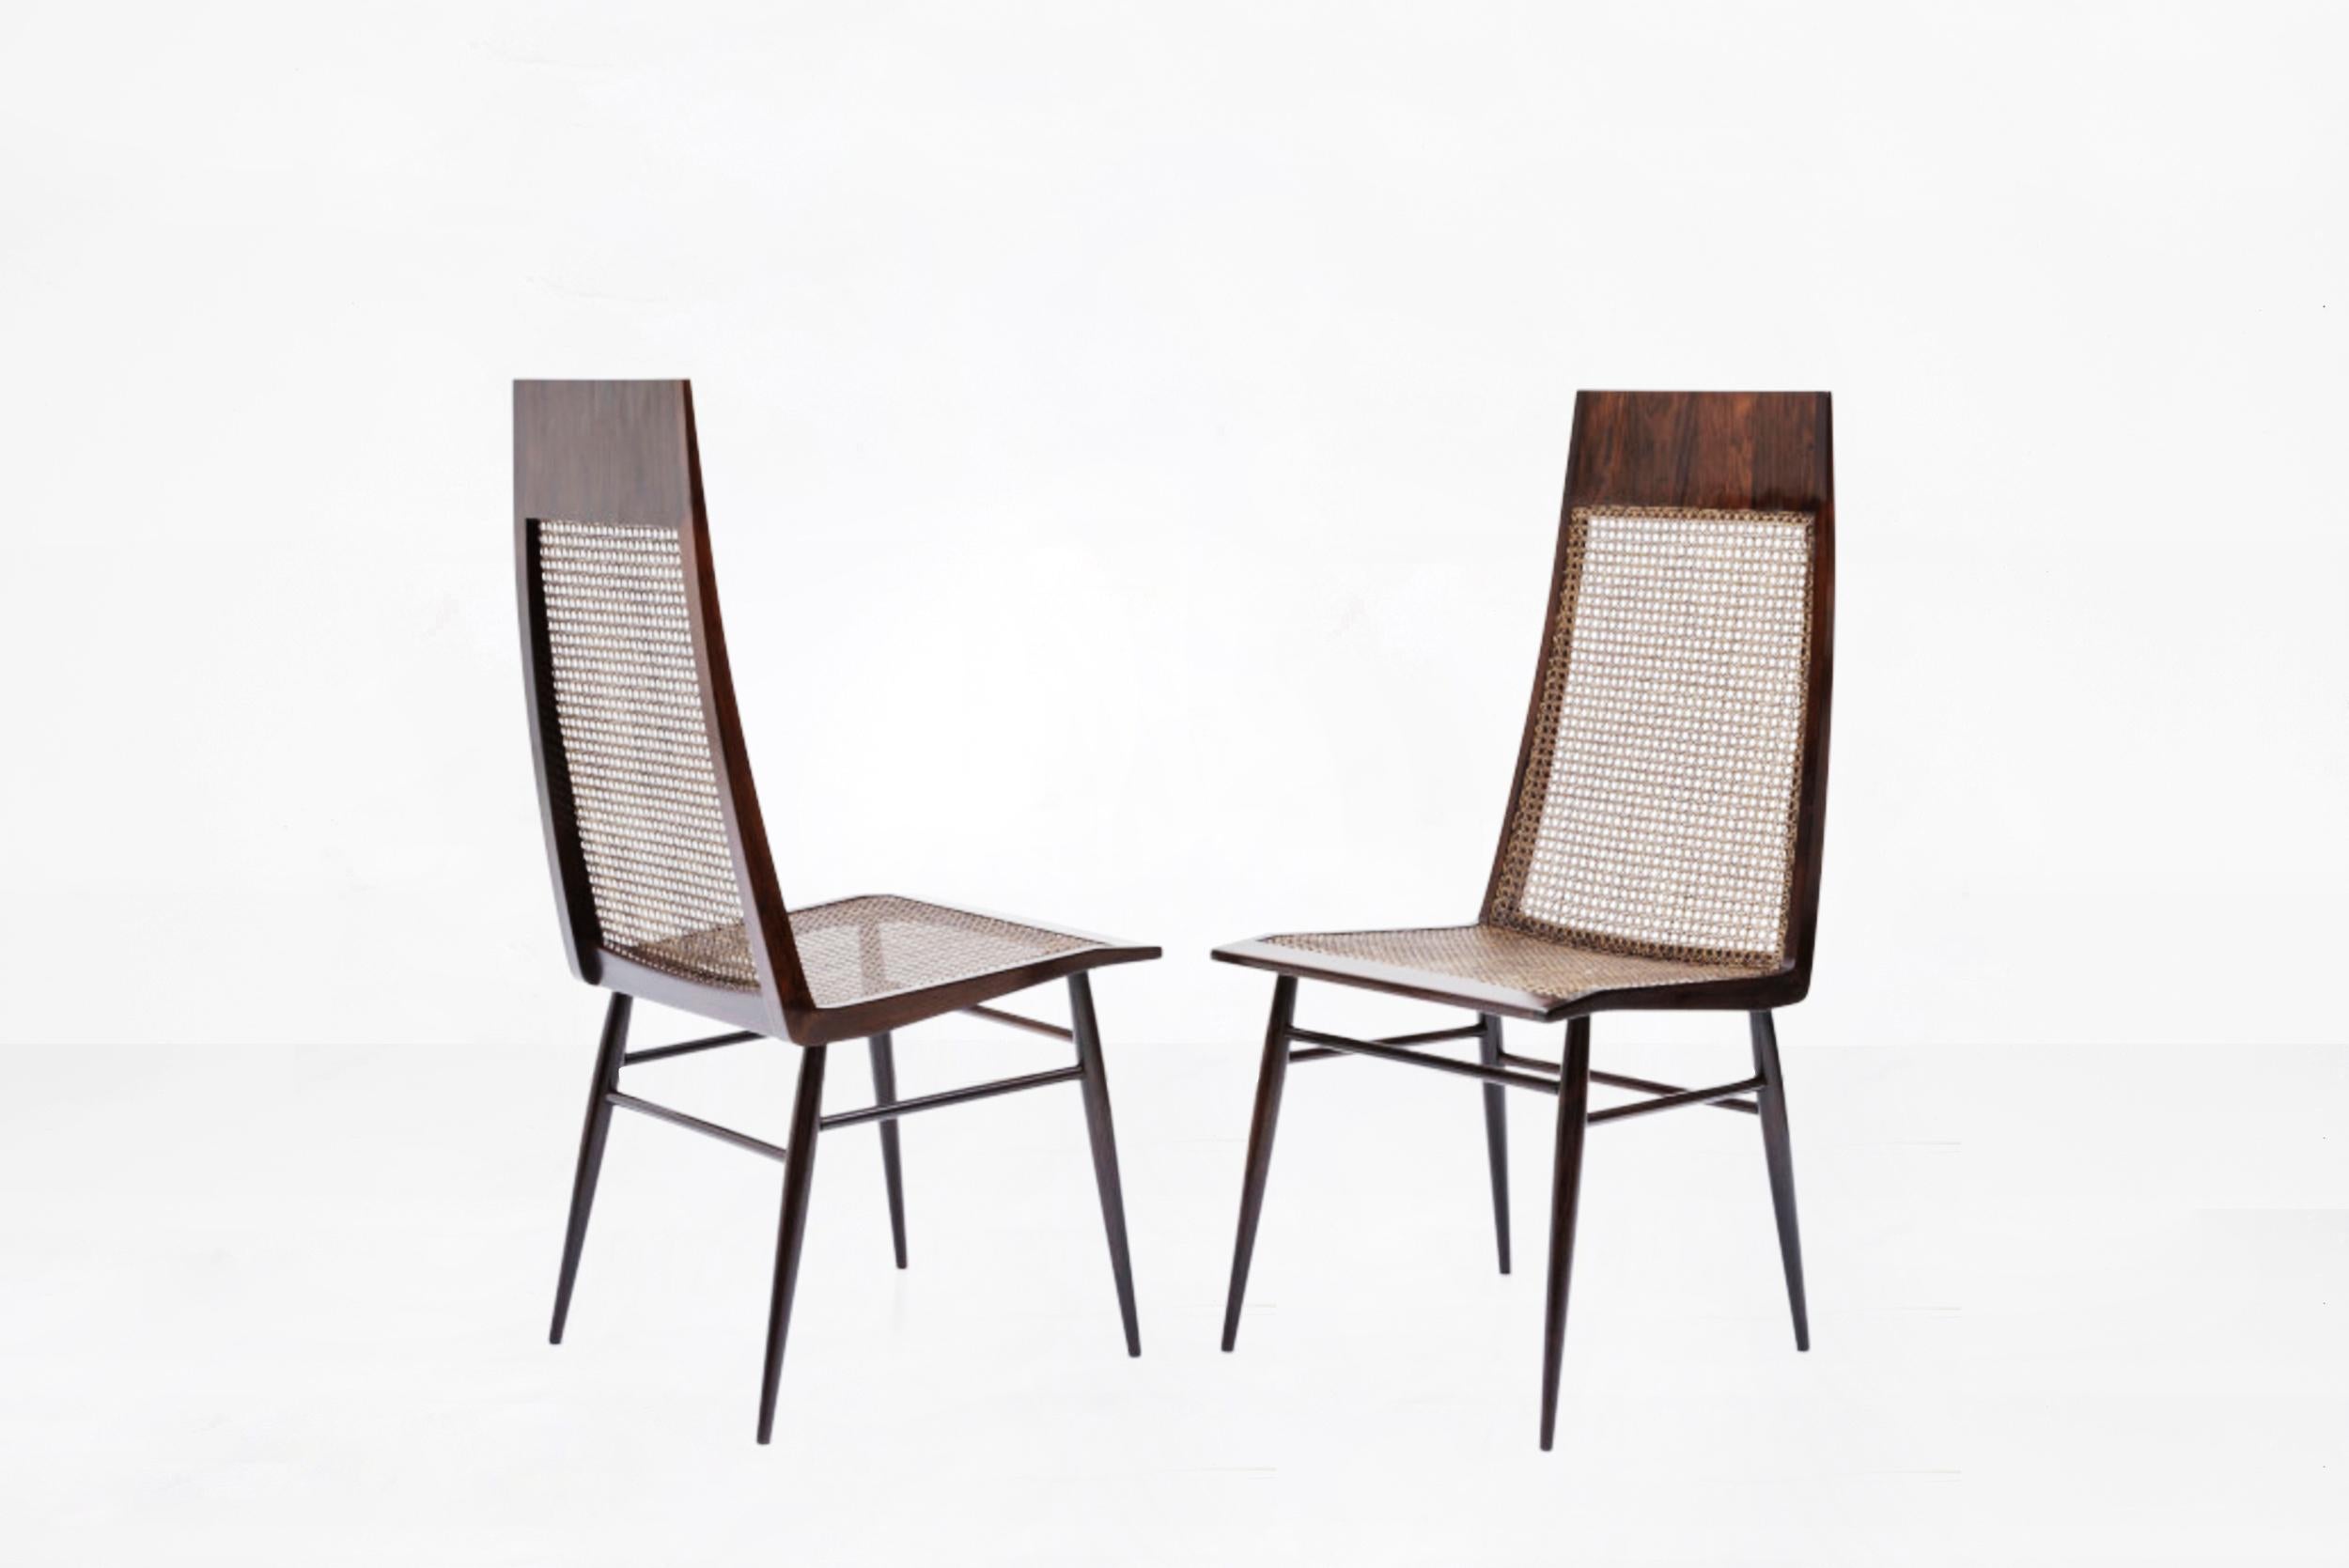 Joaquim Tenreiro

Pair of dining chairs
Manufactured by Tenreiro Moveis e Decoraçoes
Brasil, 1950
Jacaranda wood, cane
From the archives of Side Gallery, Barcelona

Measurements
44.8 cm x 58.4 cm x 104.8 H cm
15.87 in x 23 in x